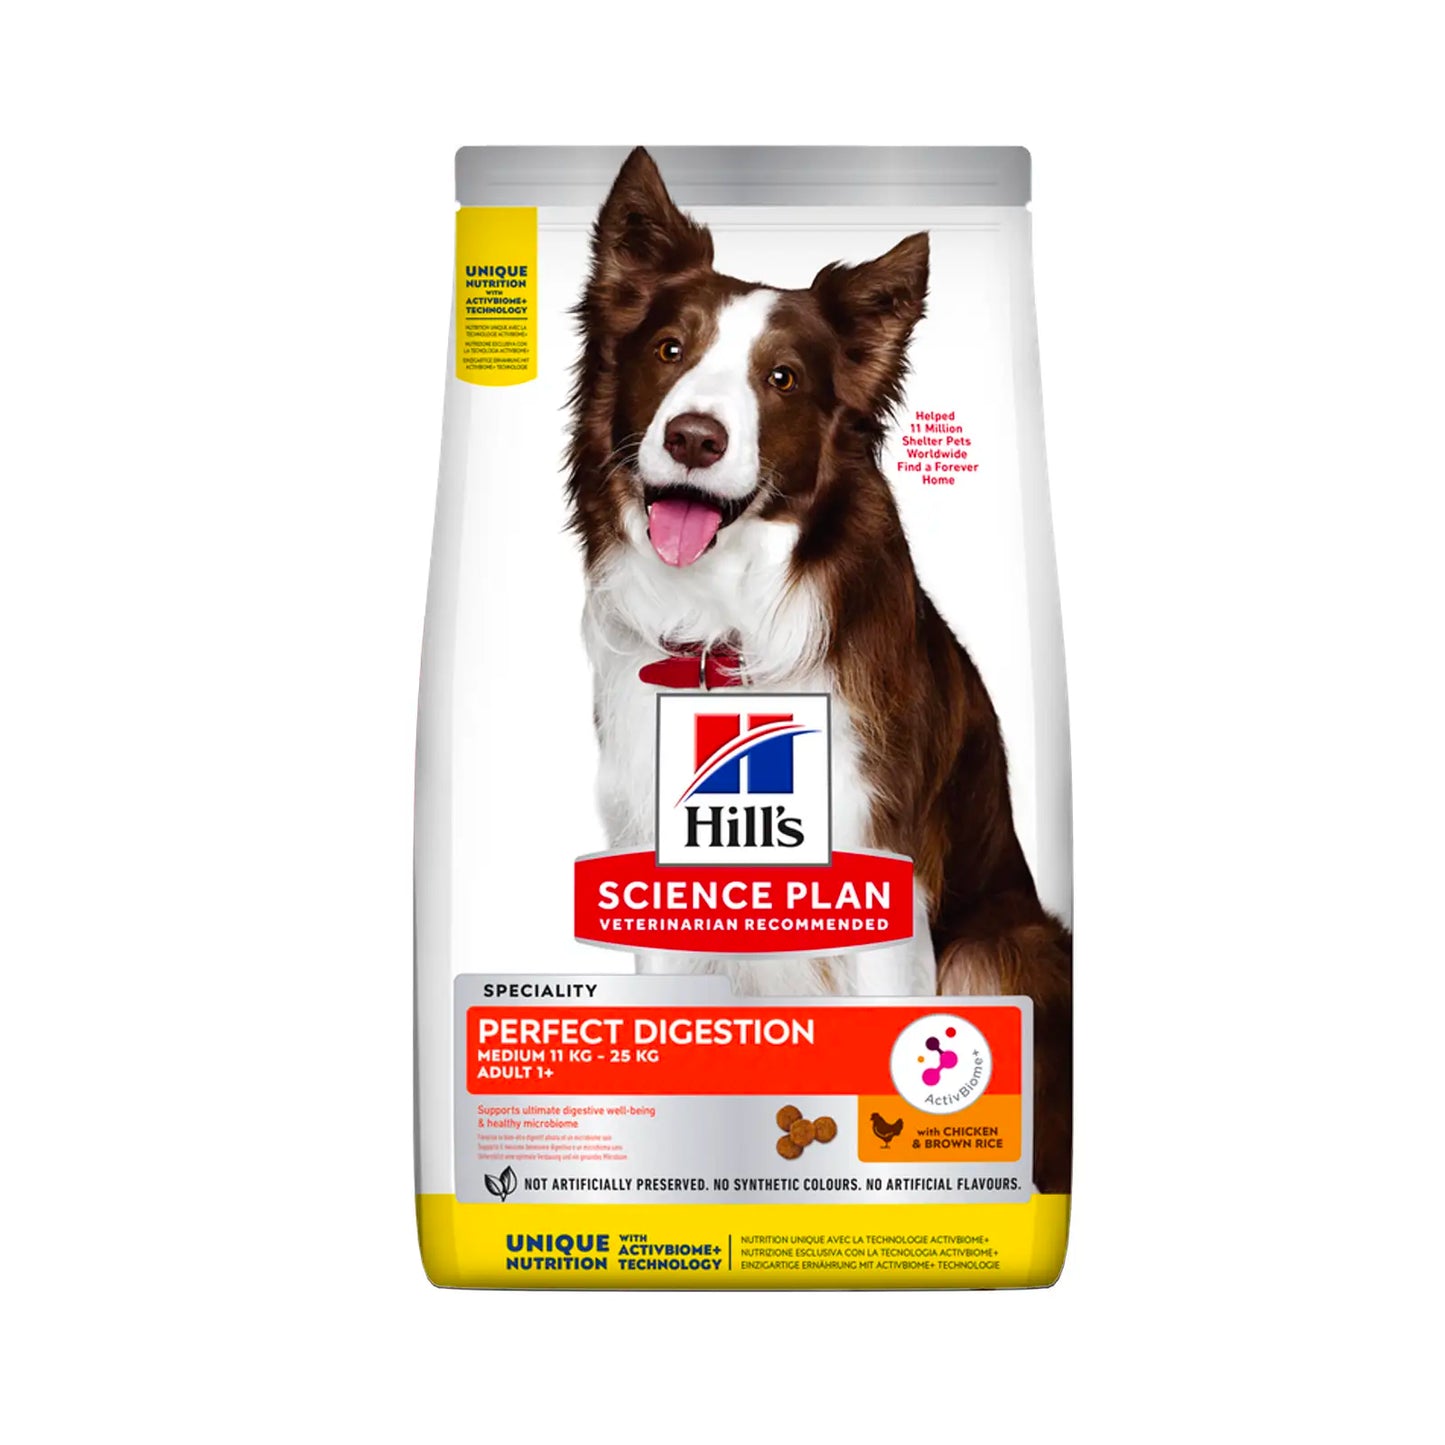 Hill's Science Diet (Specialty) - Perfect Digestion Canine Adult 1+ Chicken, Brown Rice & WholeOats 3.5lbs